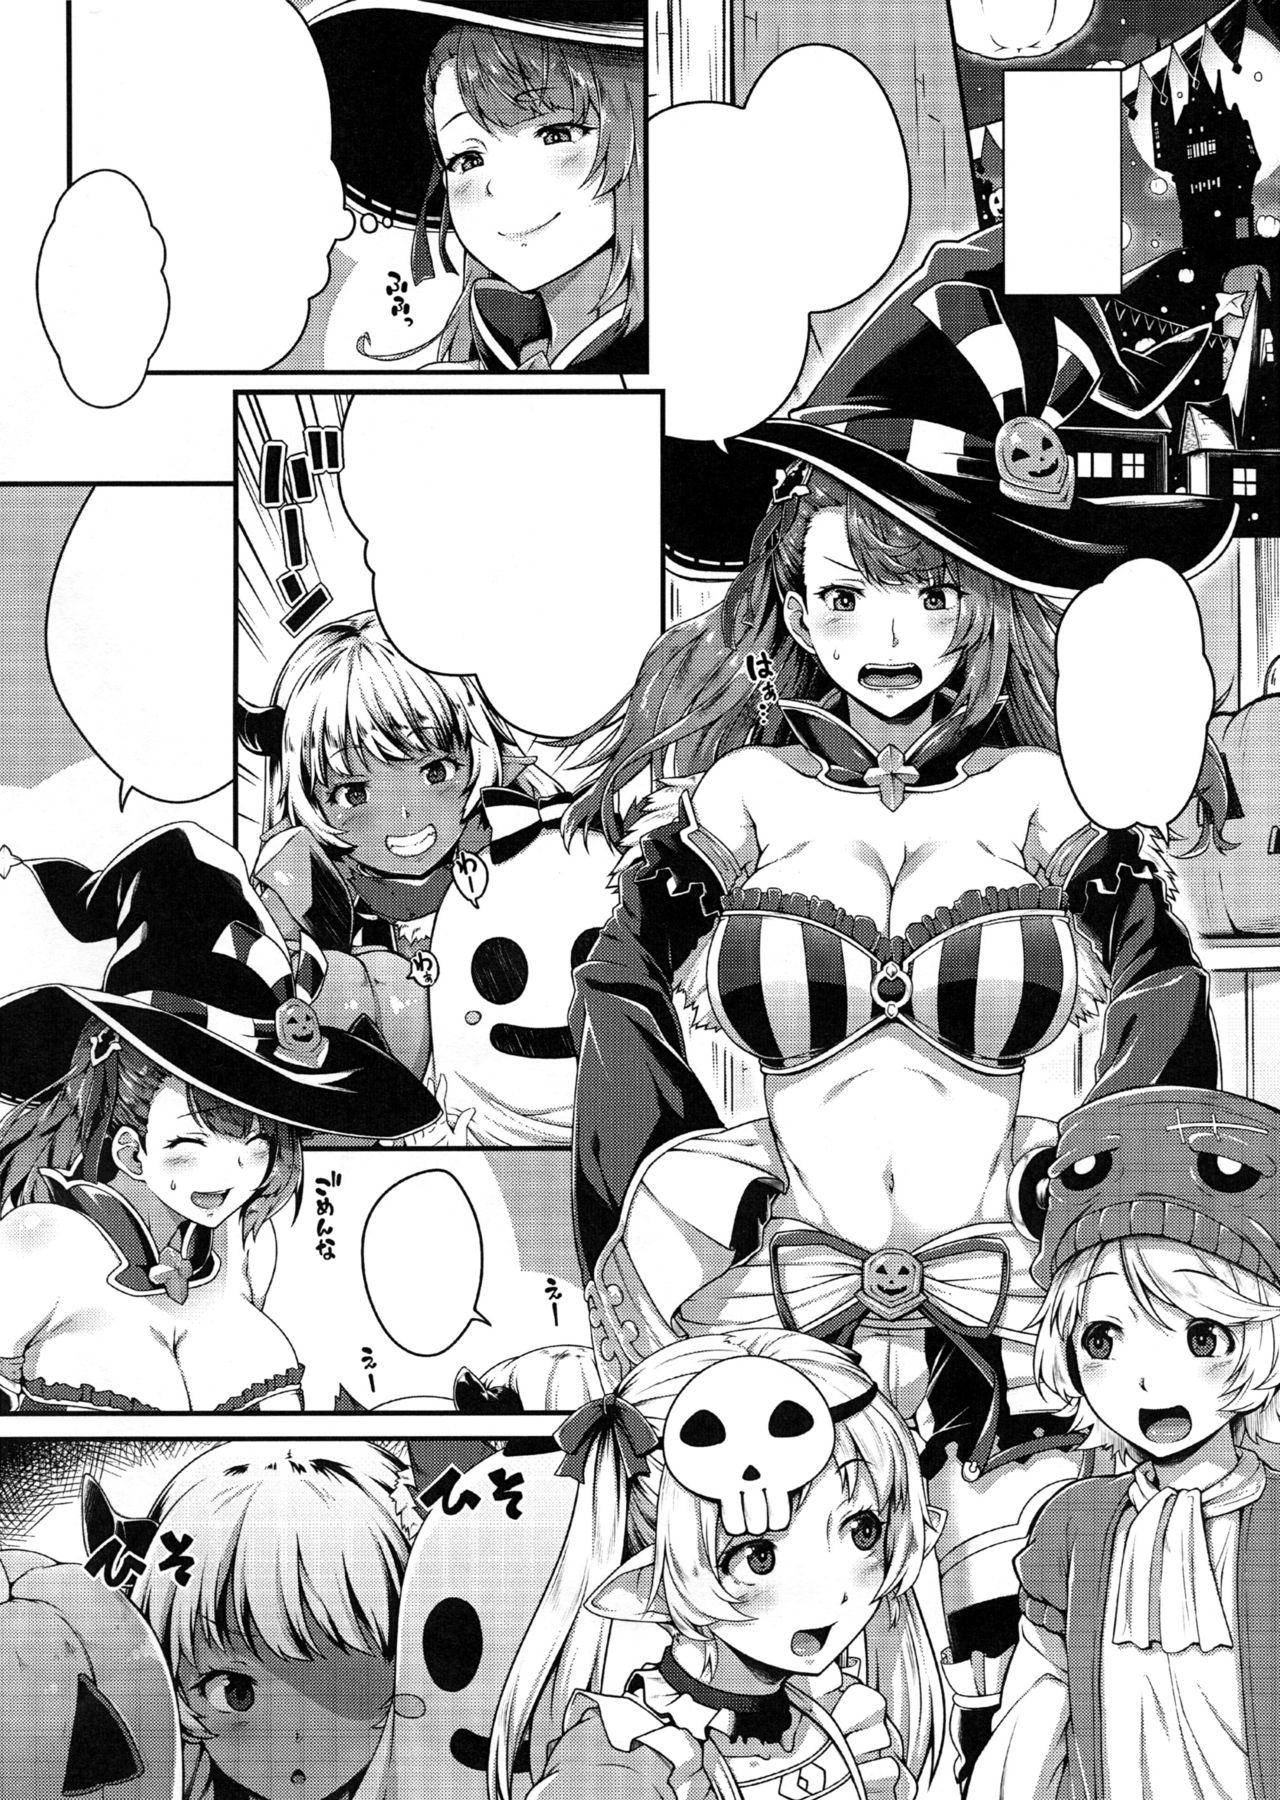 Gostoso NHAPPY HALLOWEEN - Granblue fantasy Shemale Porn - Page 2